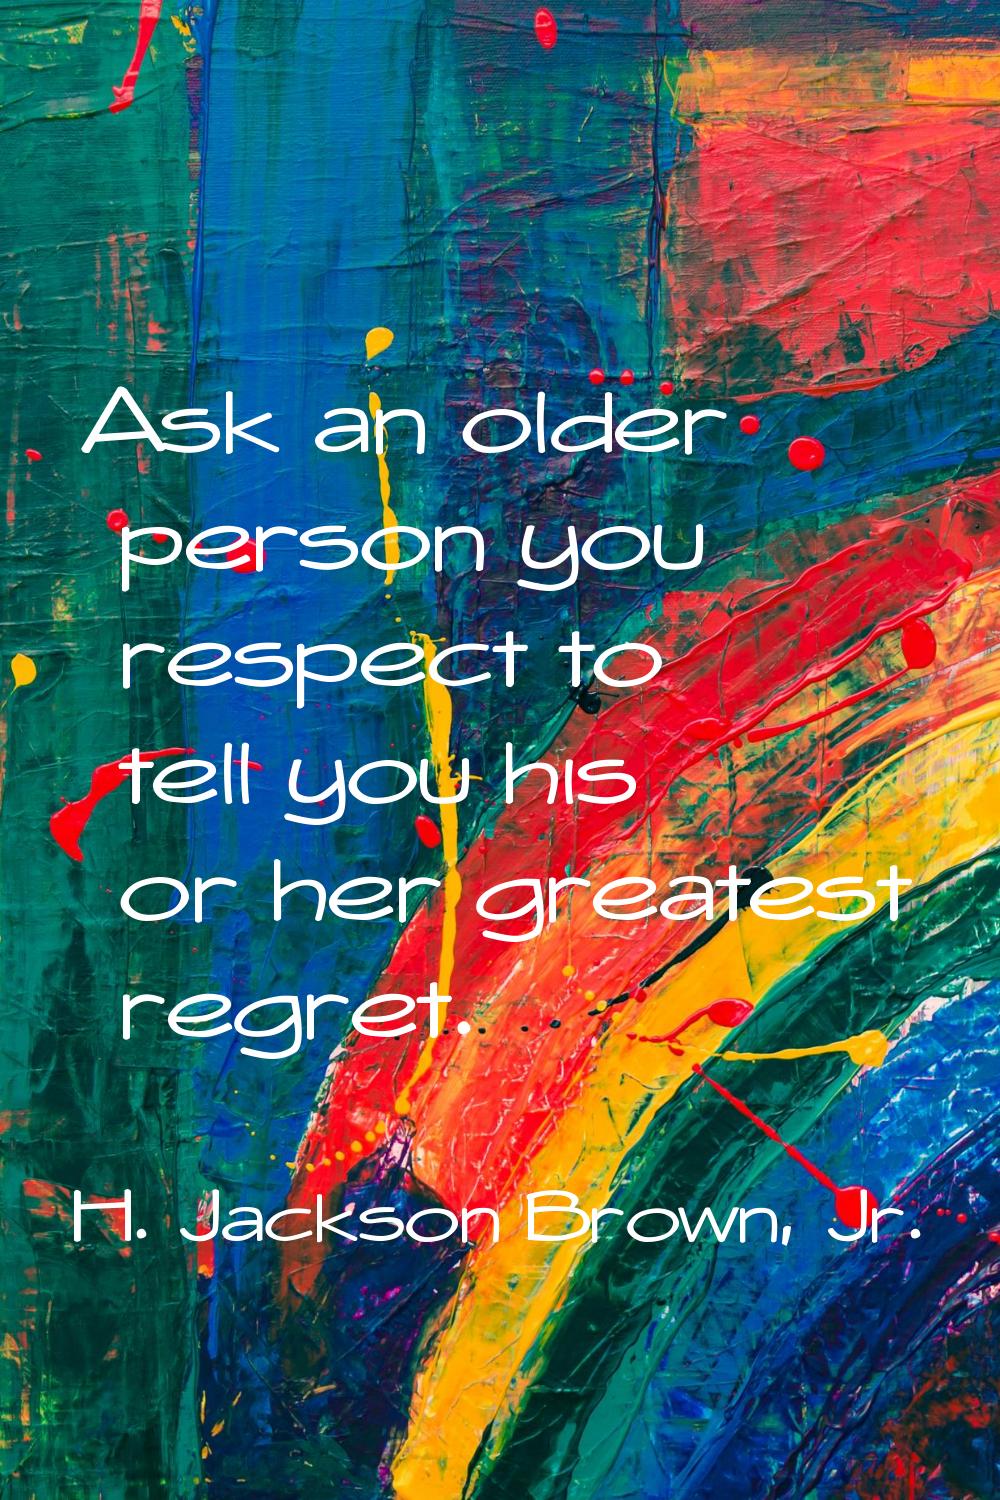 Ask an older person you respect to tell you his or her greatest regret.